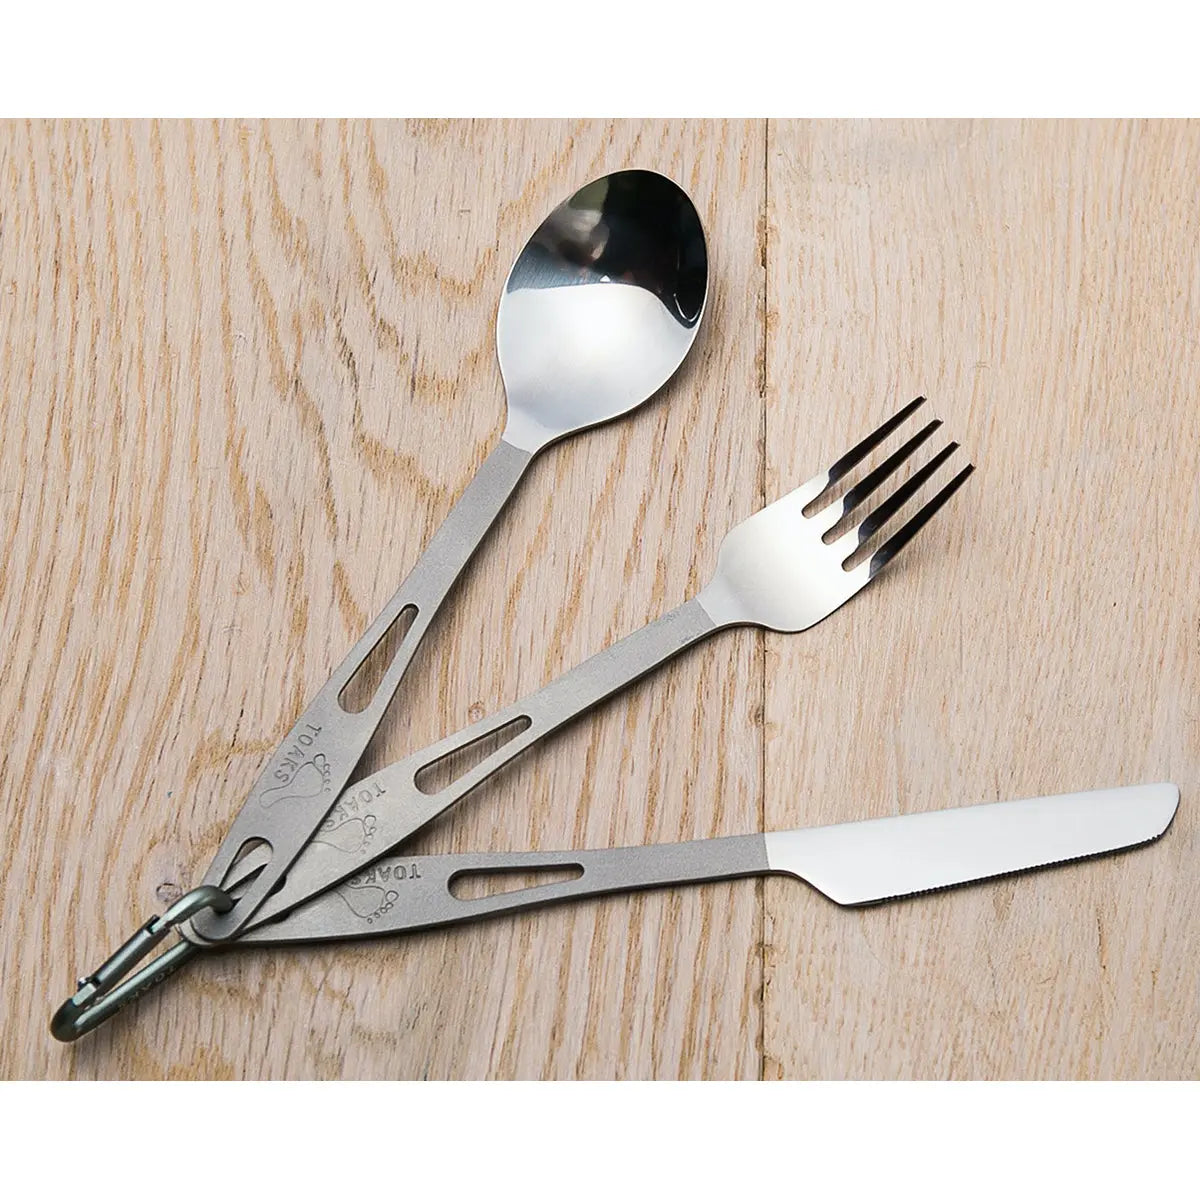 TOAKS Three-Piece Polished Head Titanium Cutlery Set with Matte Finish Handles TOAKS